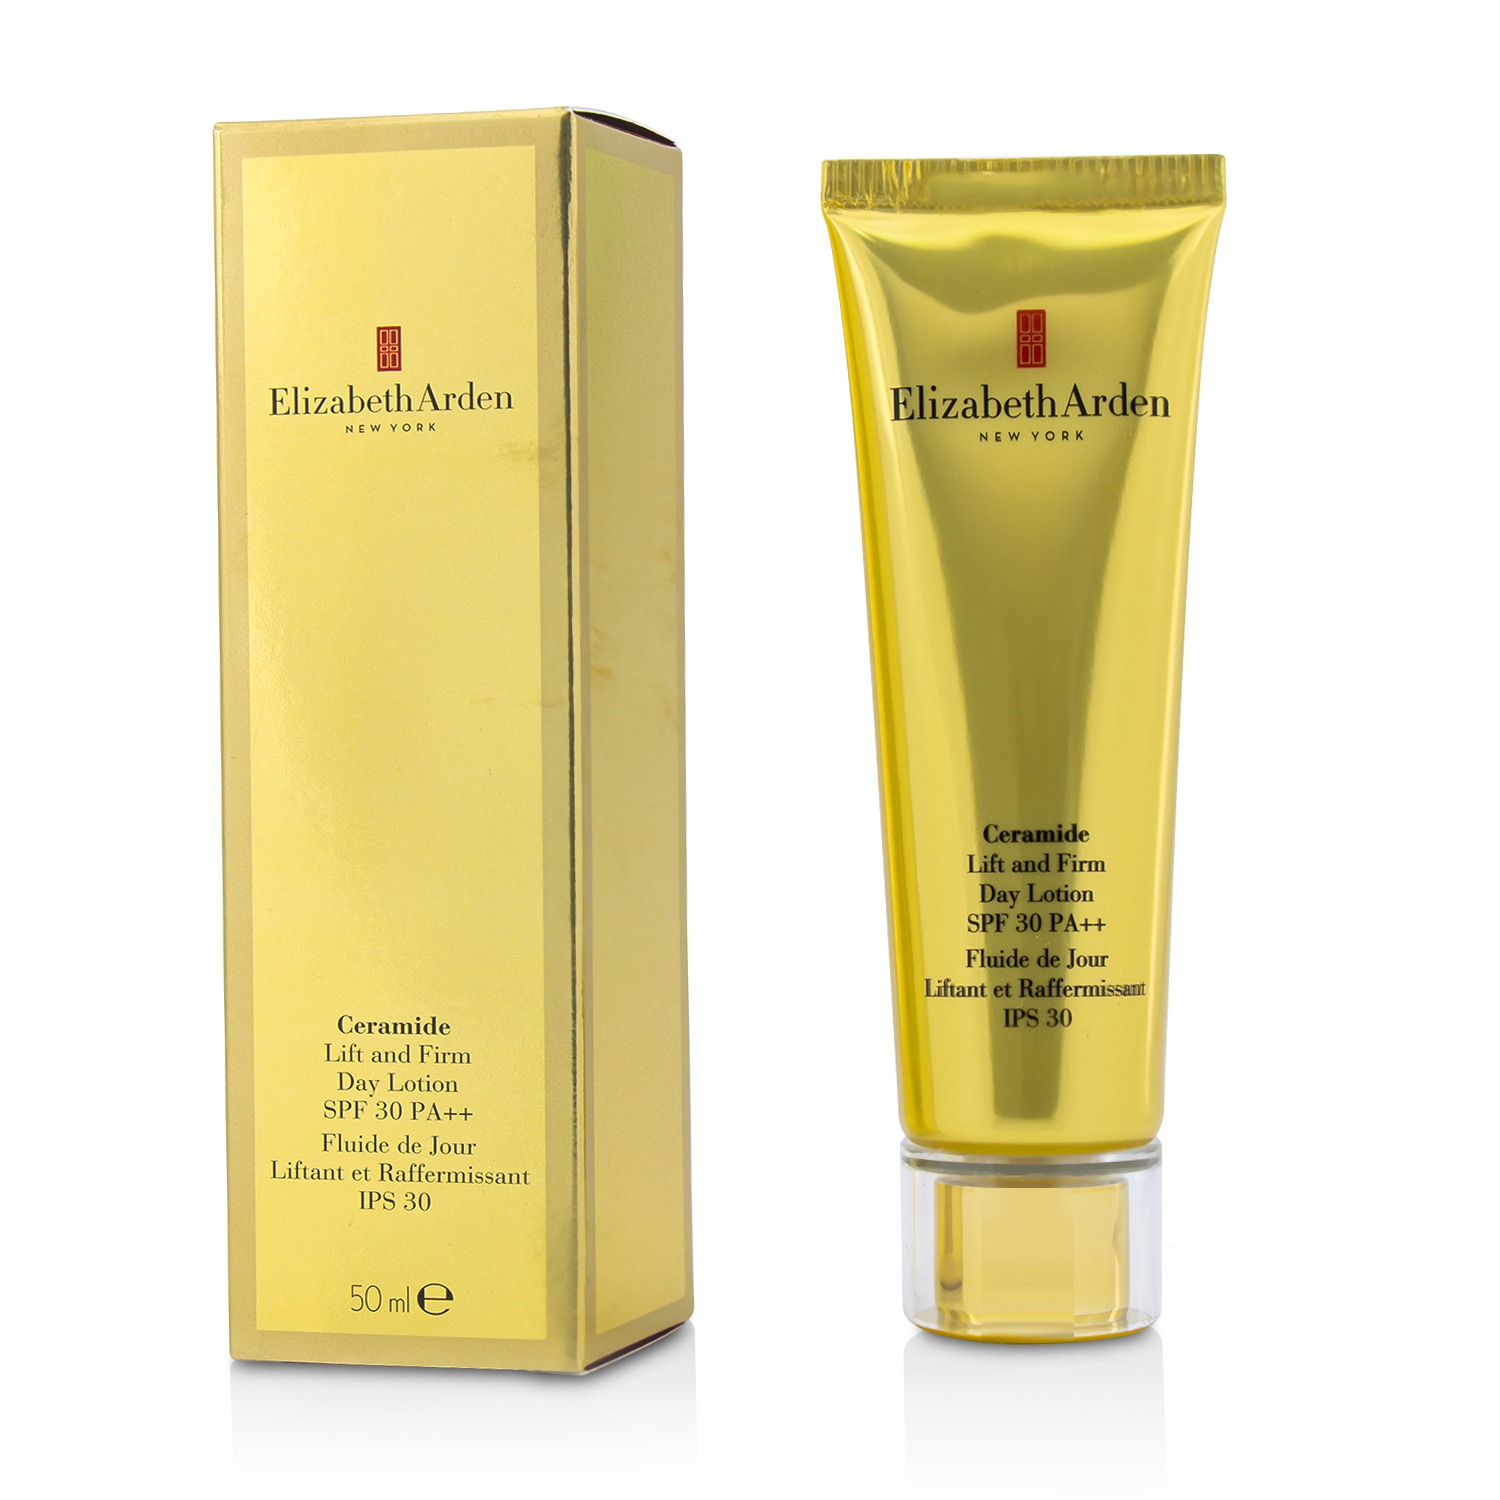 Ceramide Lift and Firm Day Lotion SPF 30 Elizabeth Arden Image